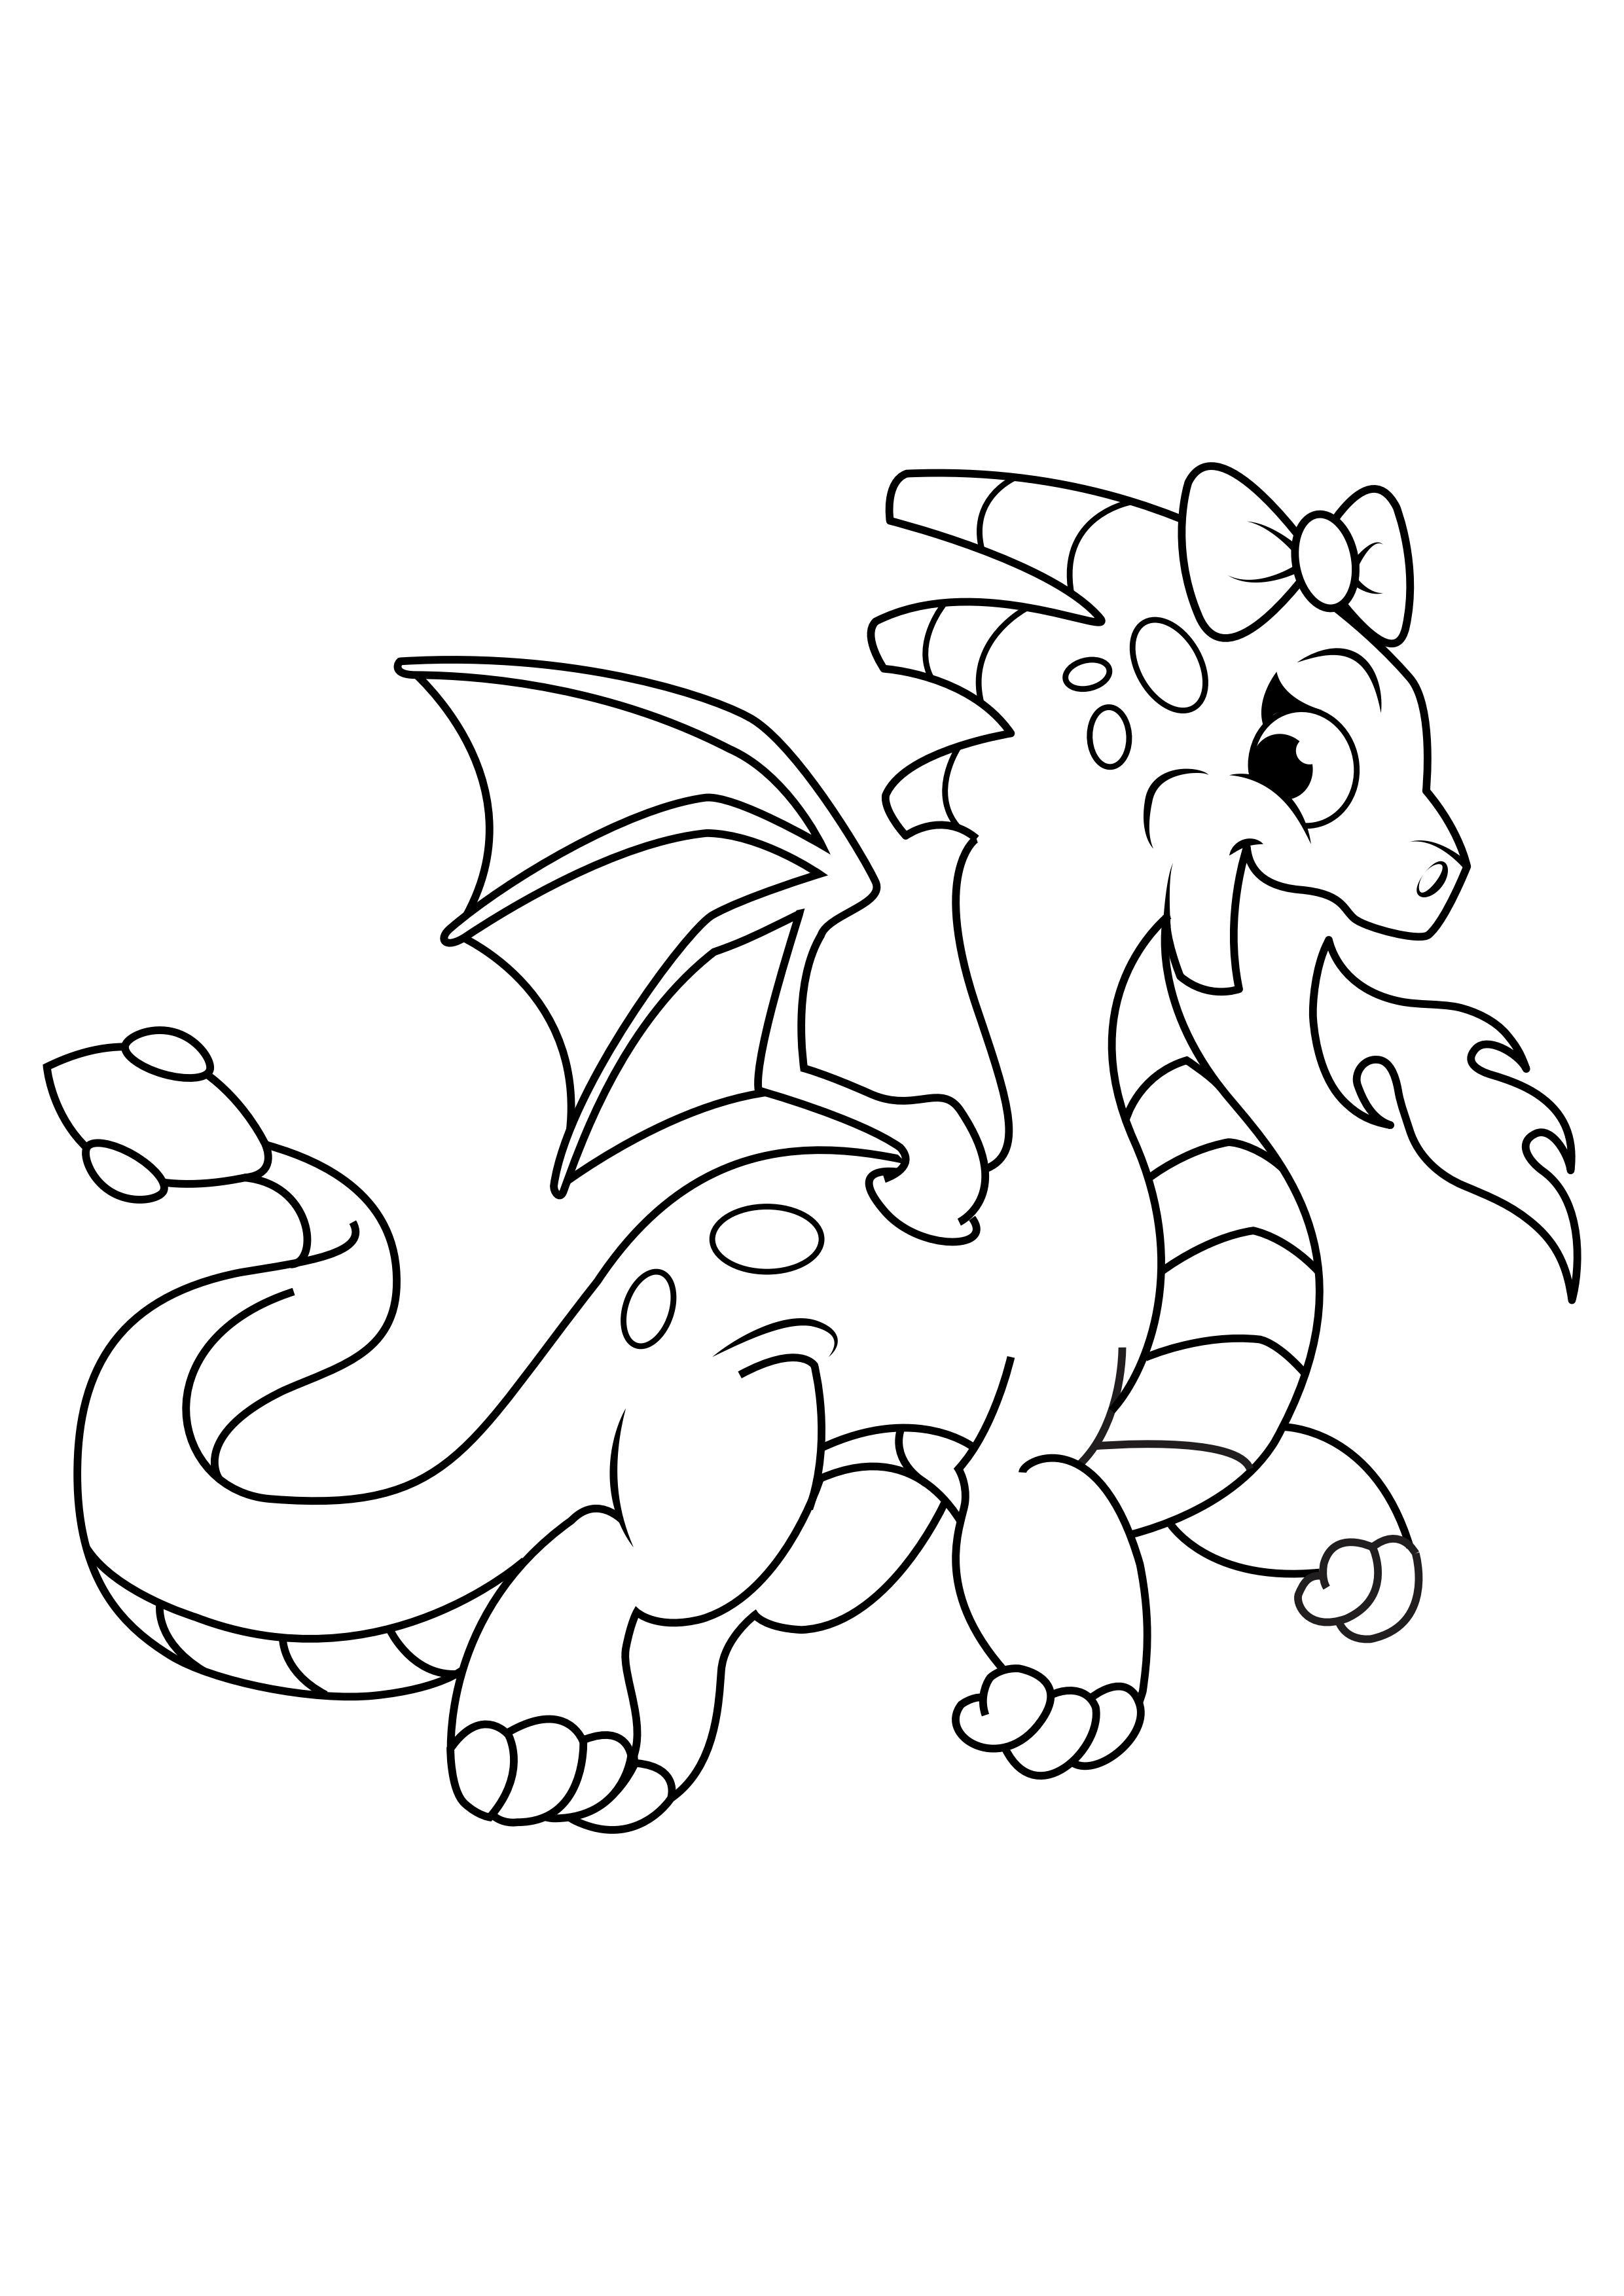 Coloring Page dragon girl spits fire   free printable coloring ...